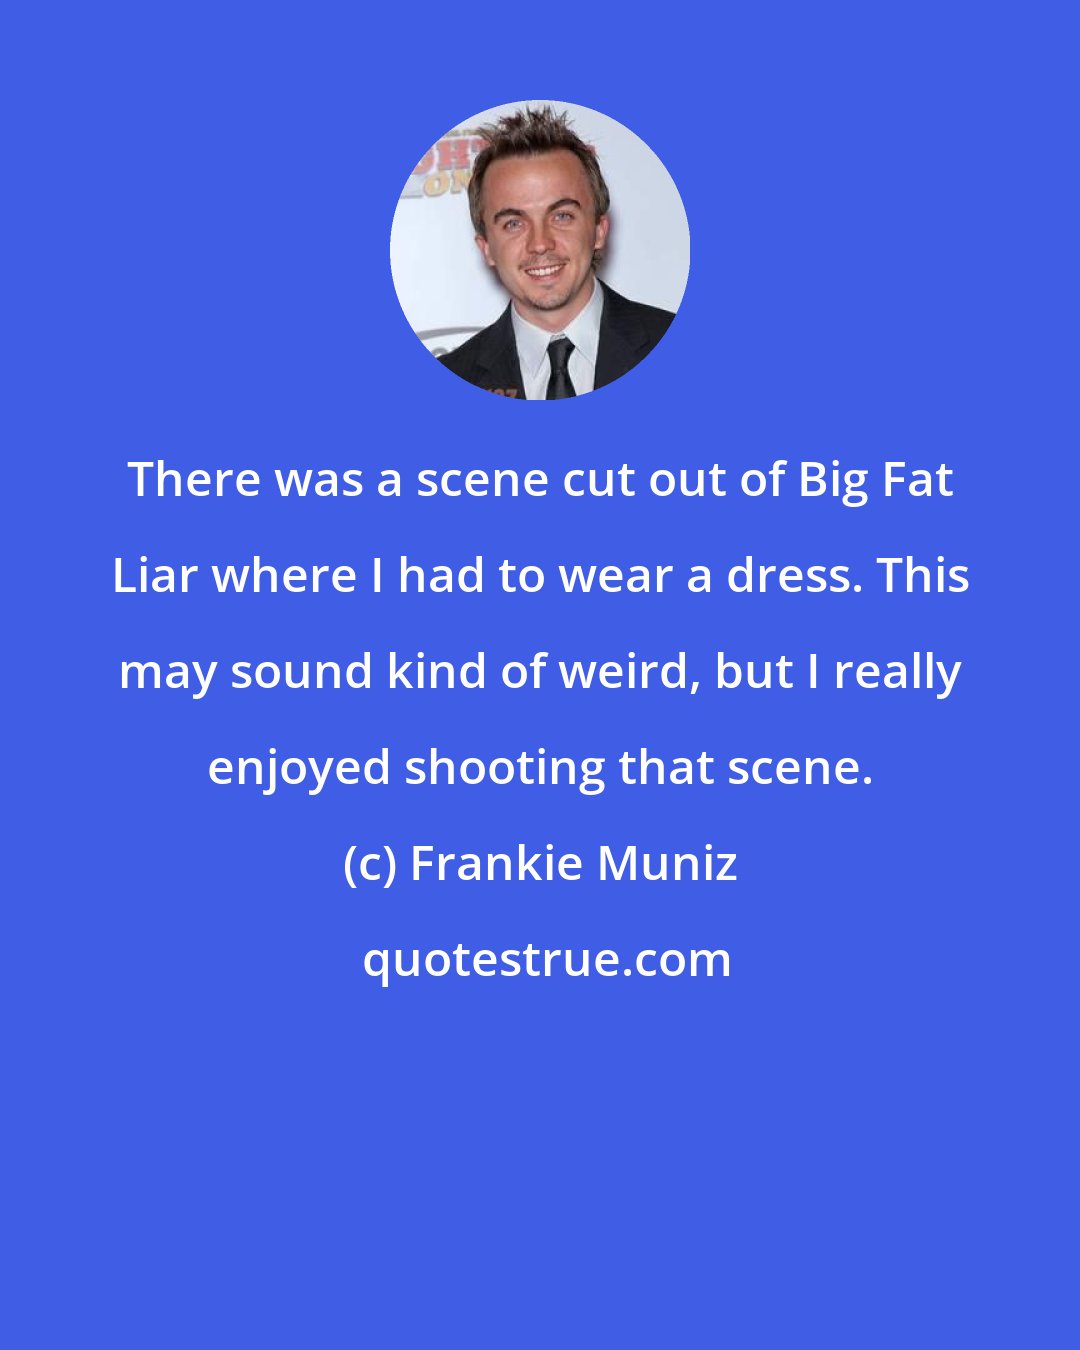 Frankie Muniz: There was a scene cut out of Big Fat Liar where I had to wear a dress. This may sound kind of weird, but I really enjoyed shooting that scene.